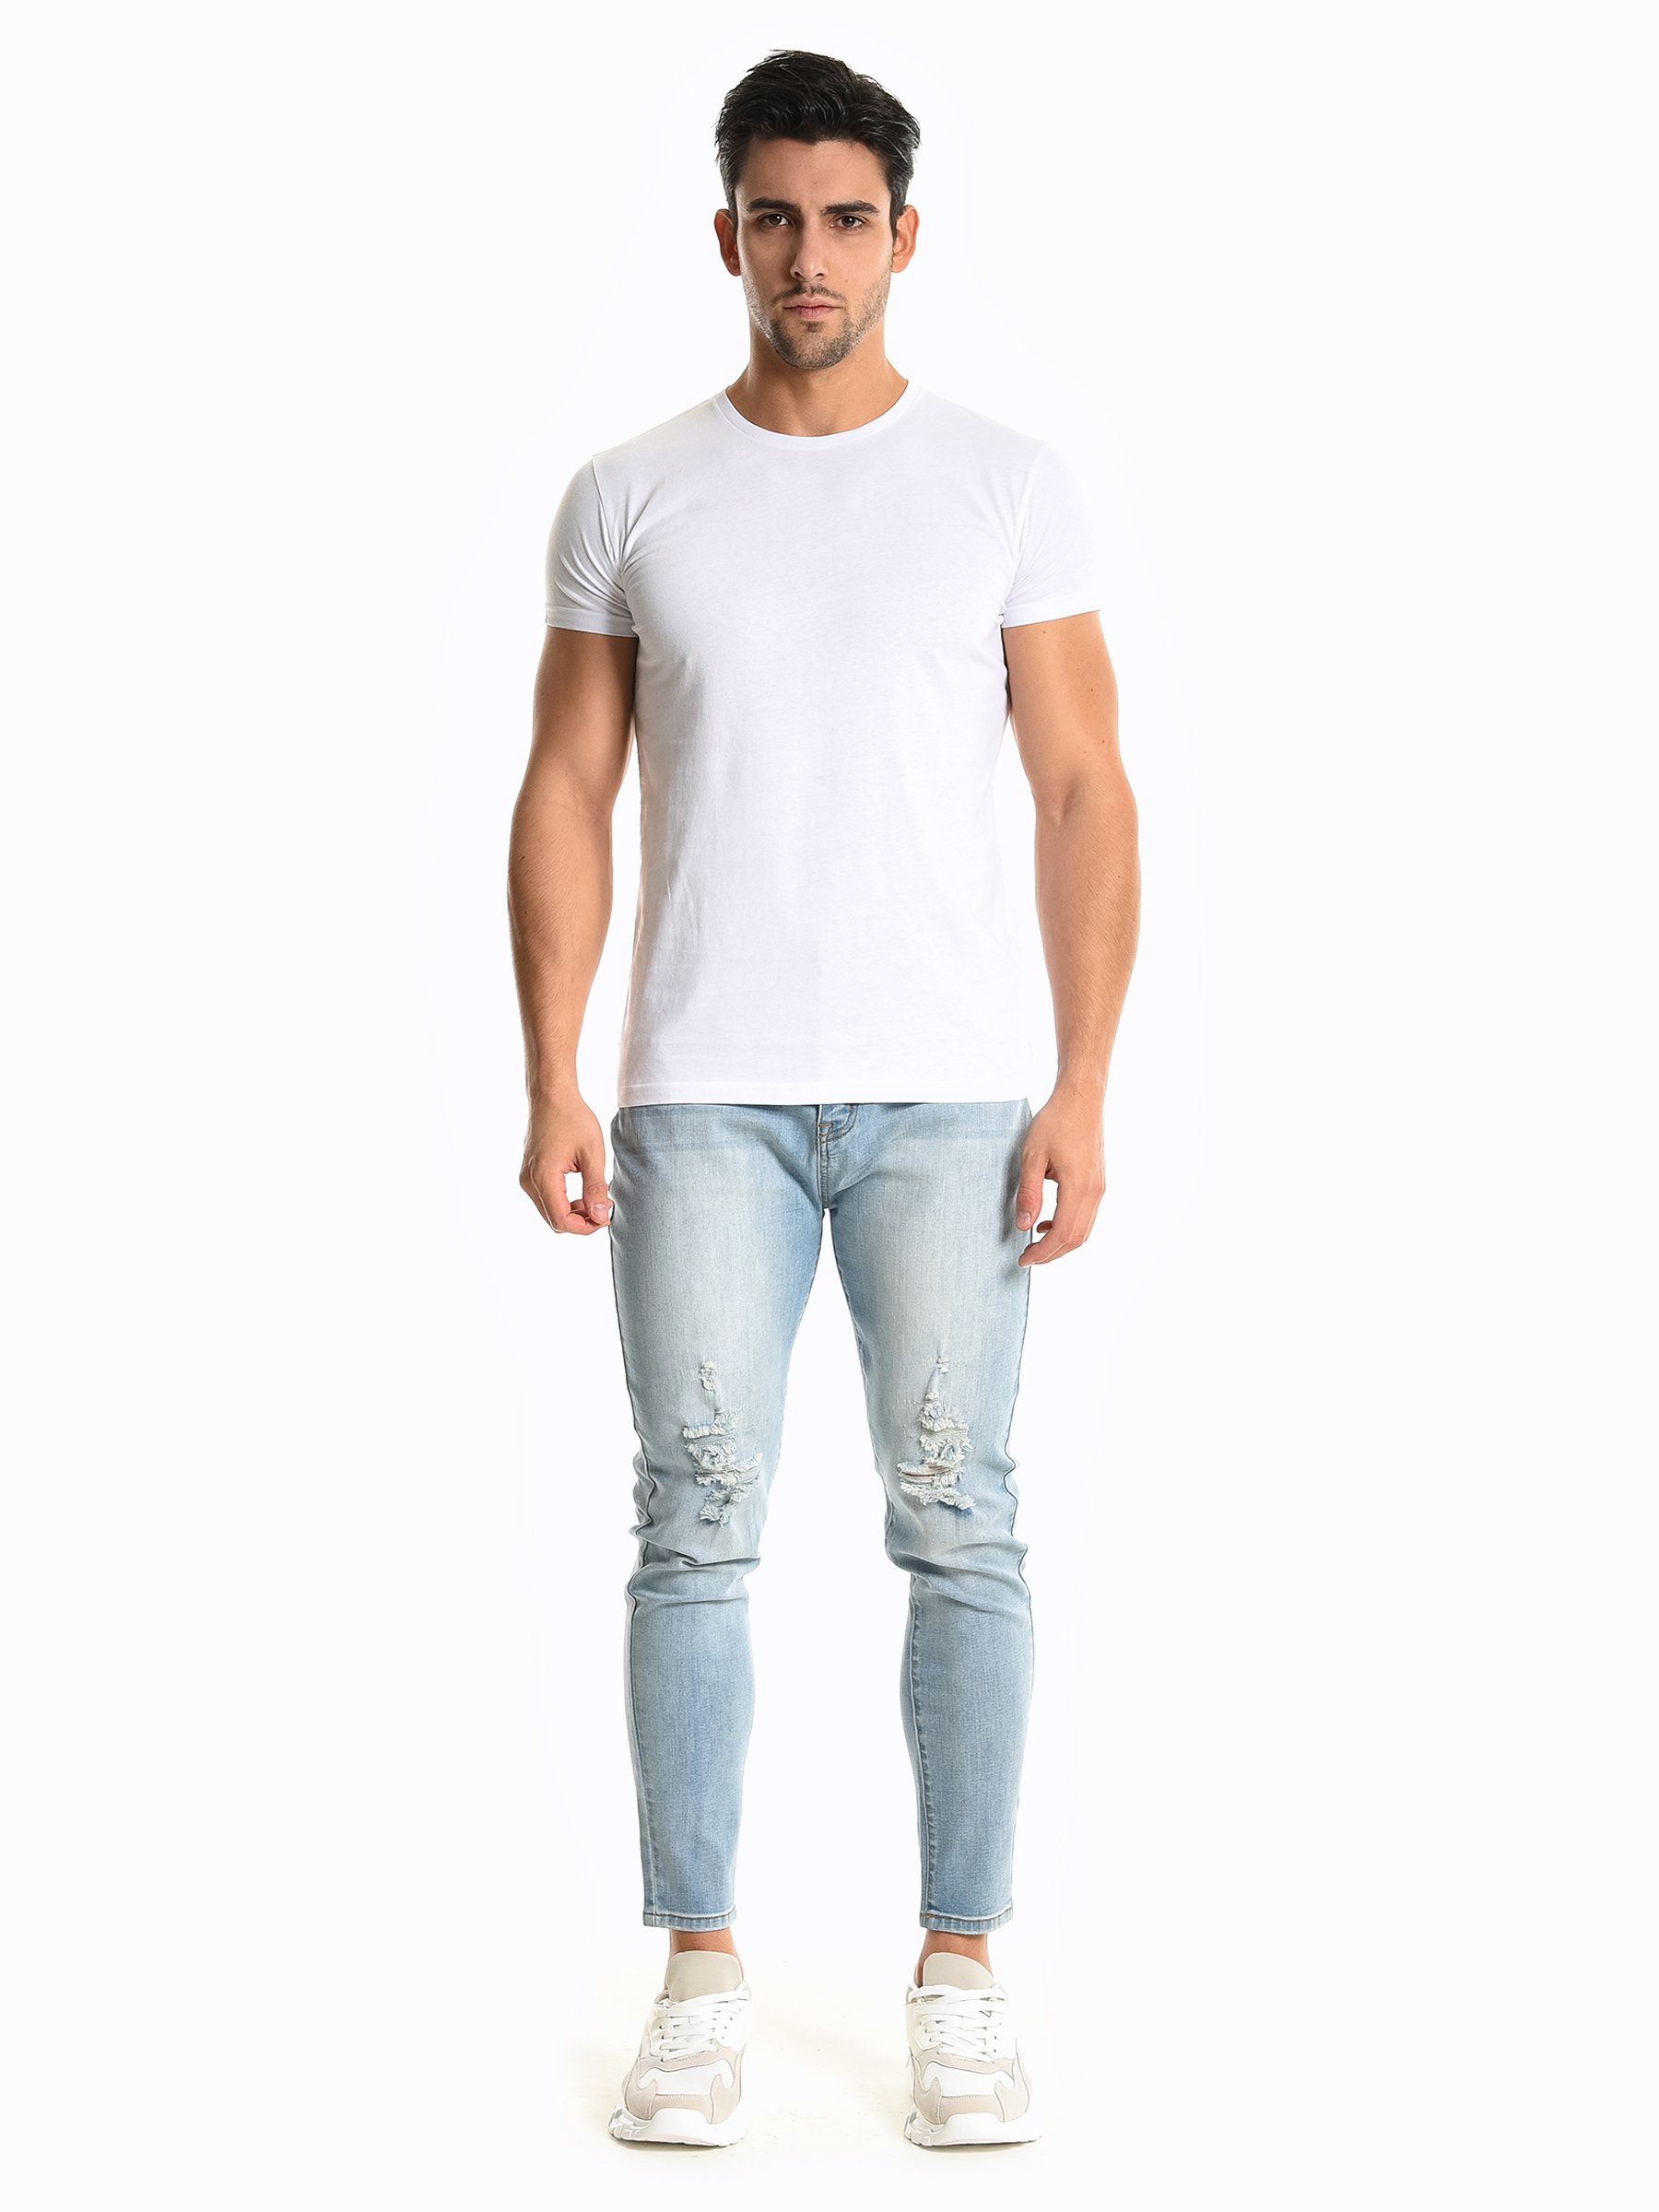 Green High Rise Carrot Fit Pants Online Shopping | OXXOSHOP